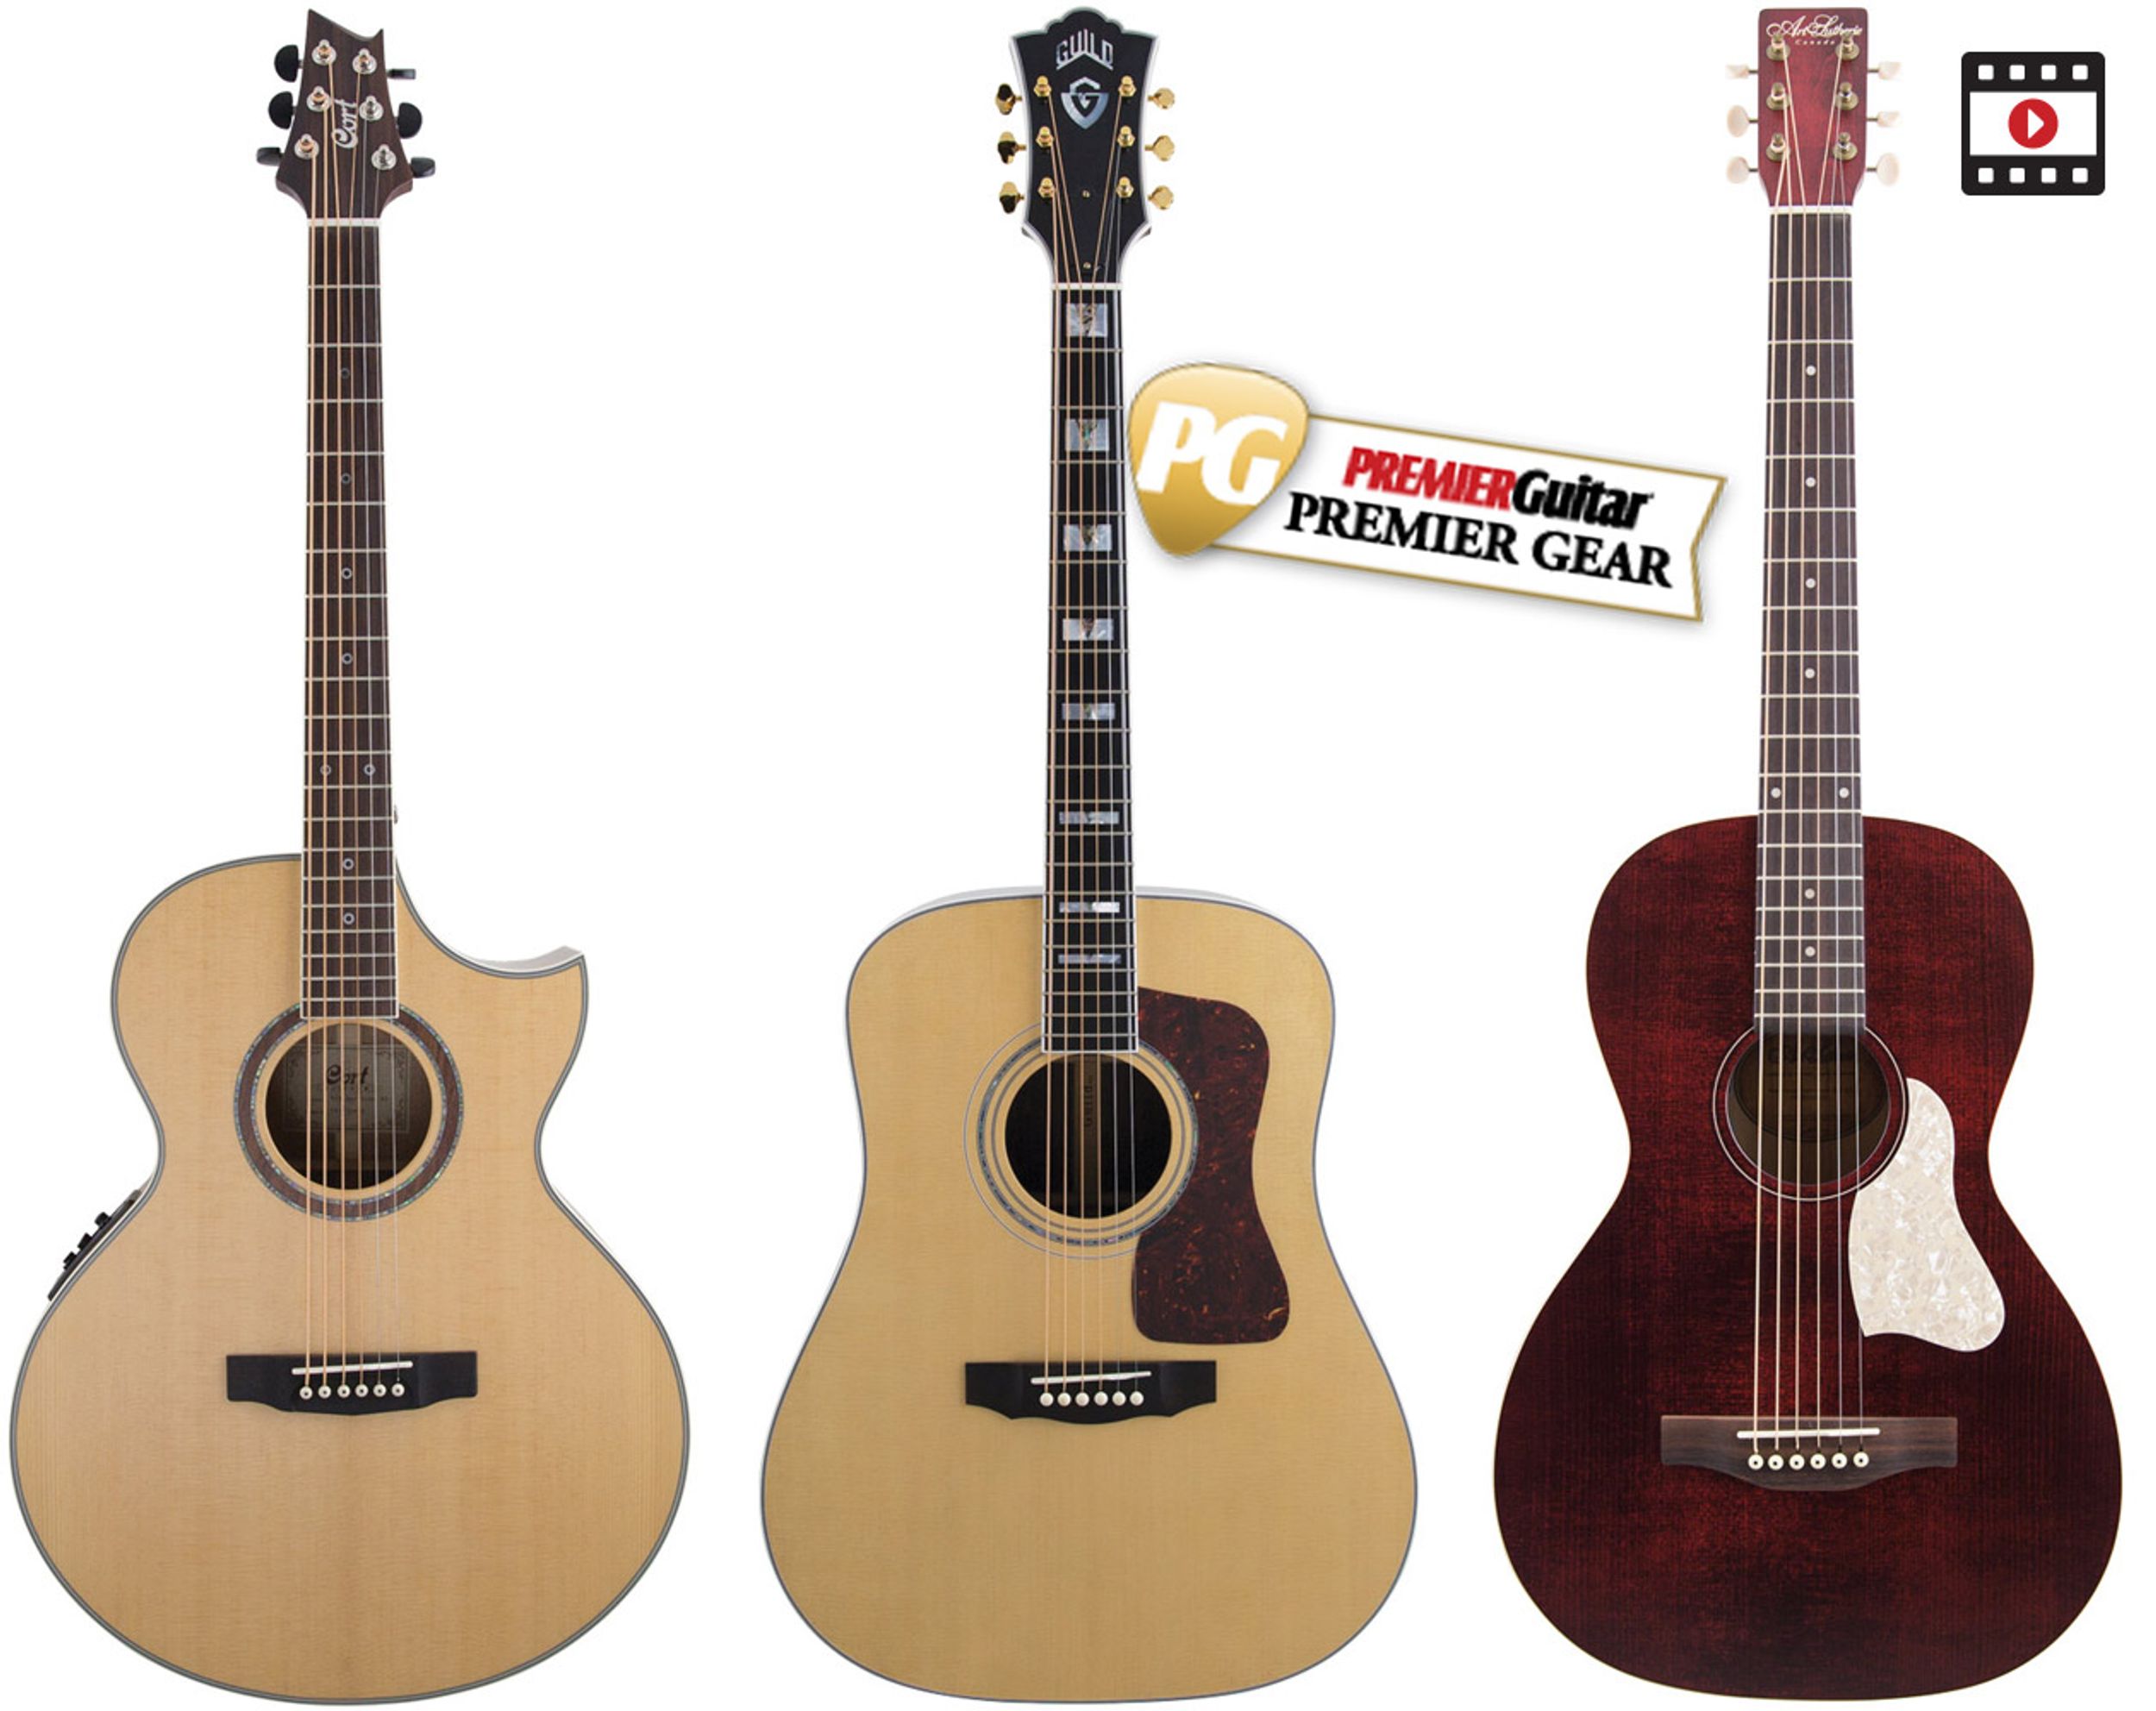 Flattop Finesse: Acoustic Steel-String Review Roundup 